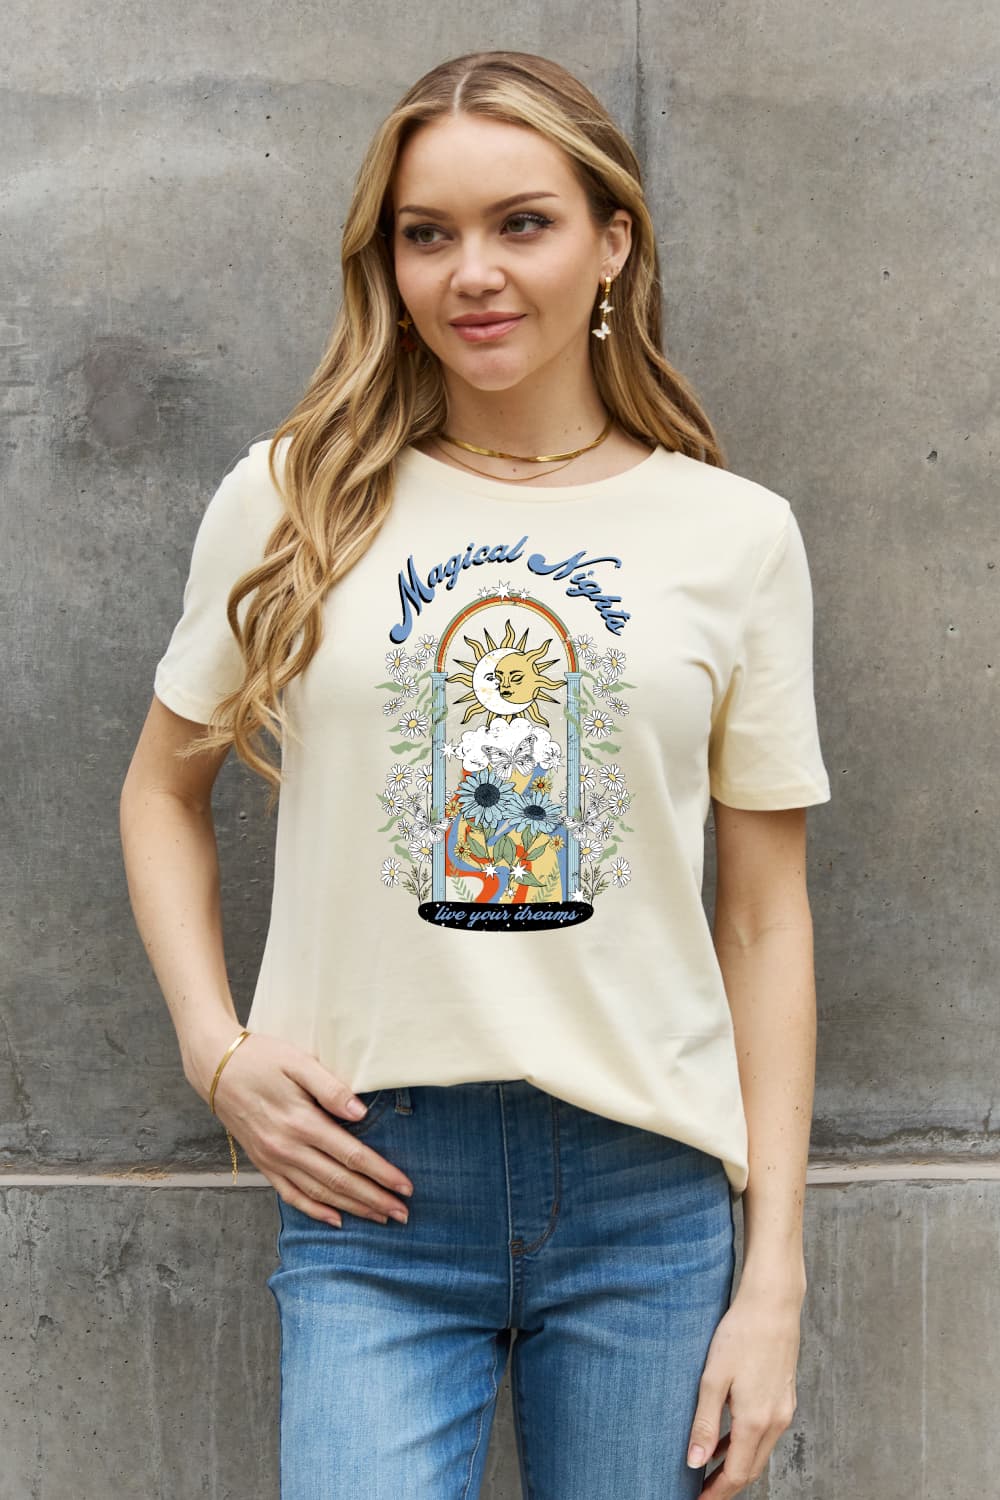 Simply Love Full Size MAGICAL NIGHTS LIVE YOUR DREAMS Graphic Cotton Tee